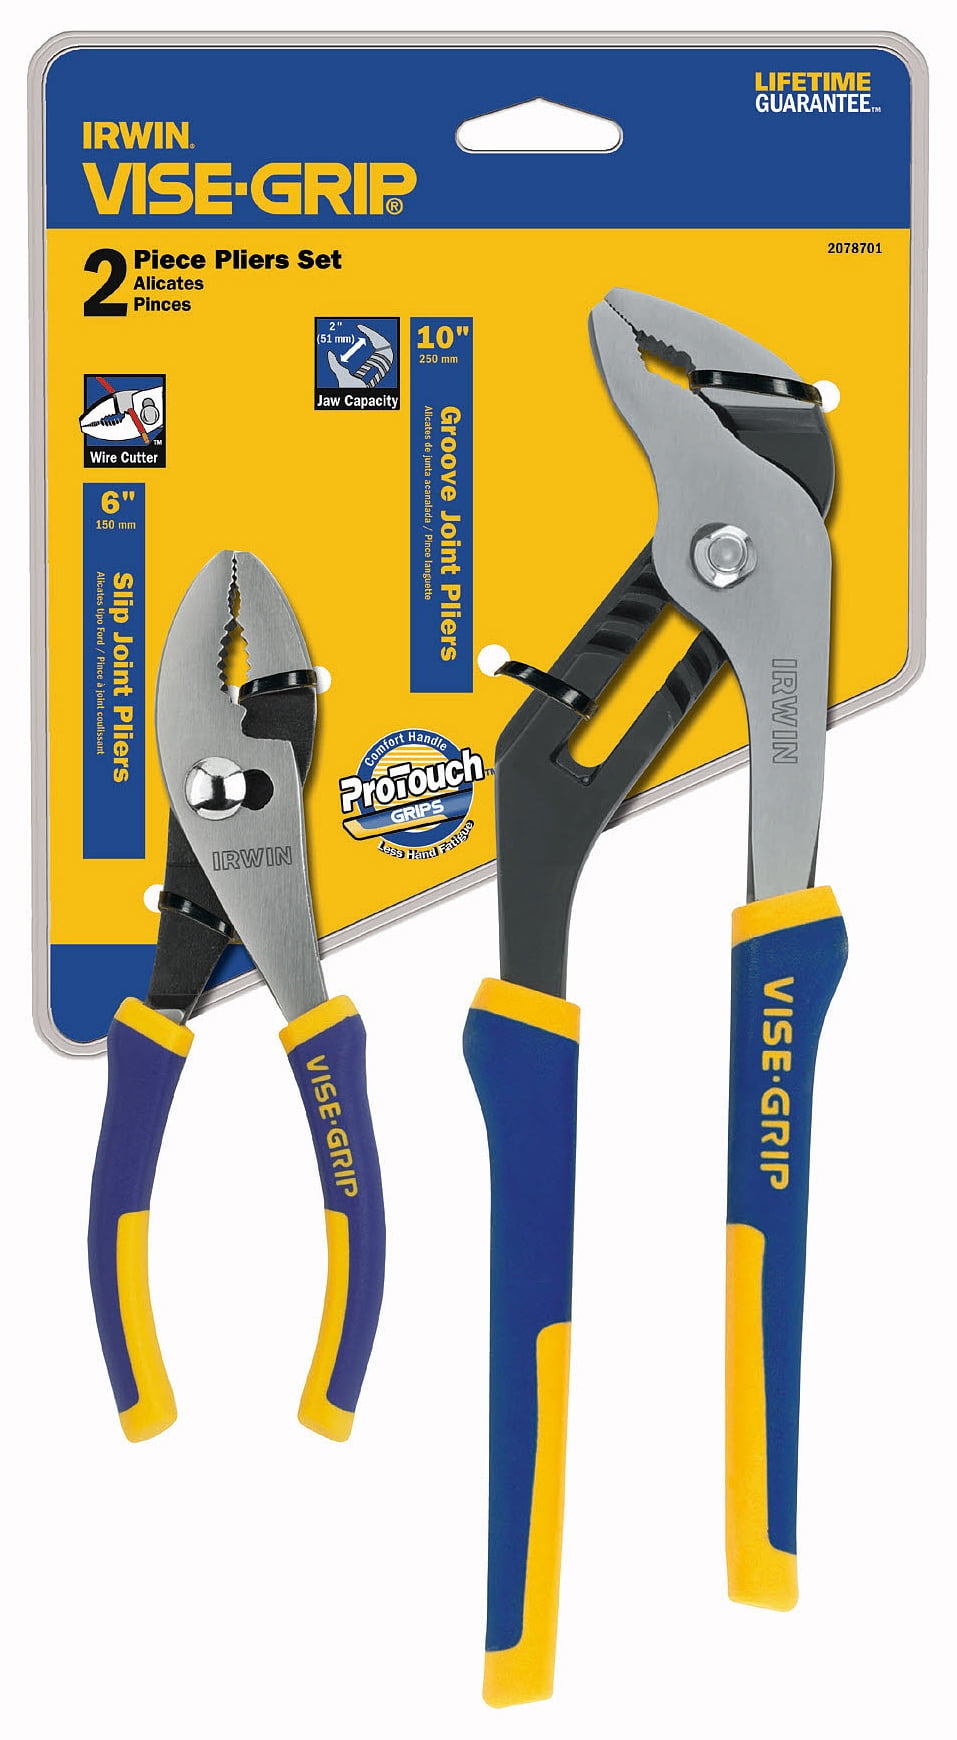 IRWIN Vise-Grip Convertible 6-in Snap Ring Pliers Set ProTouch Power Hand Tools